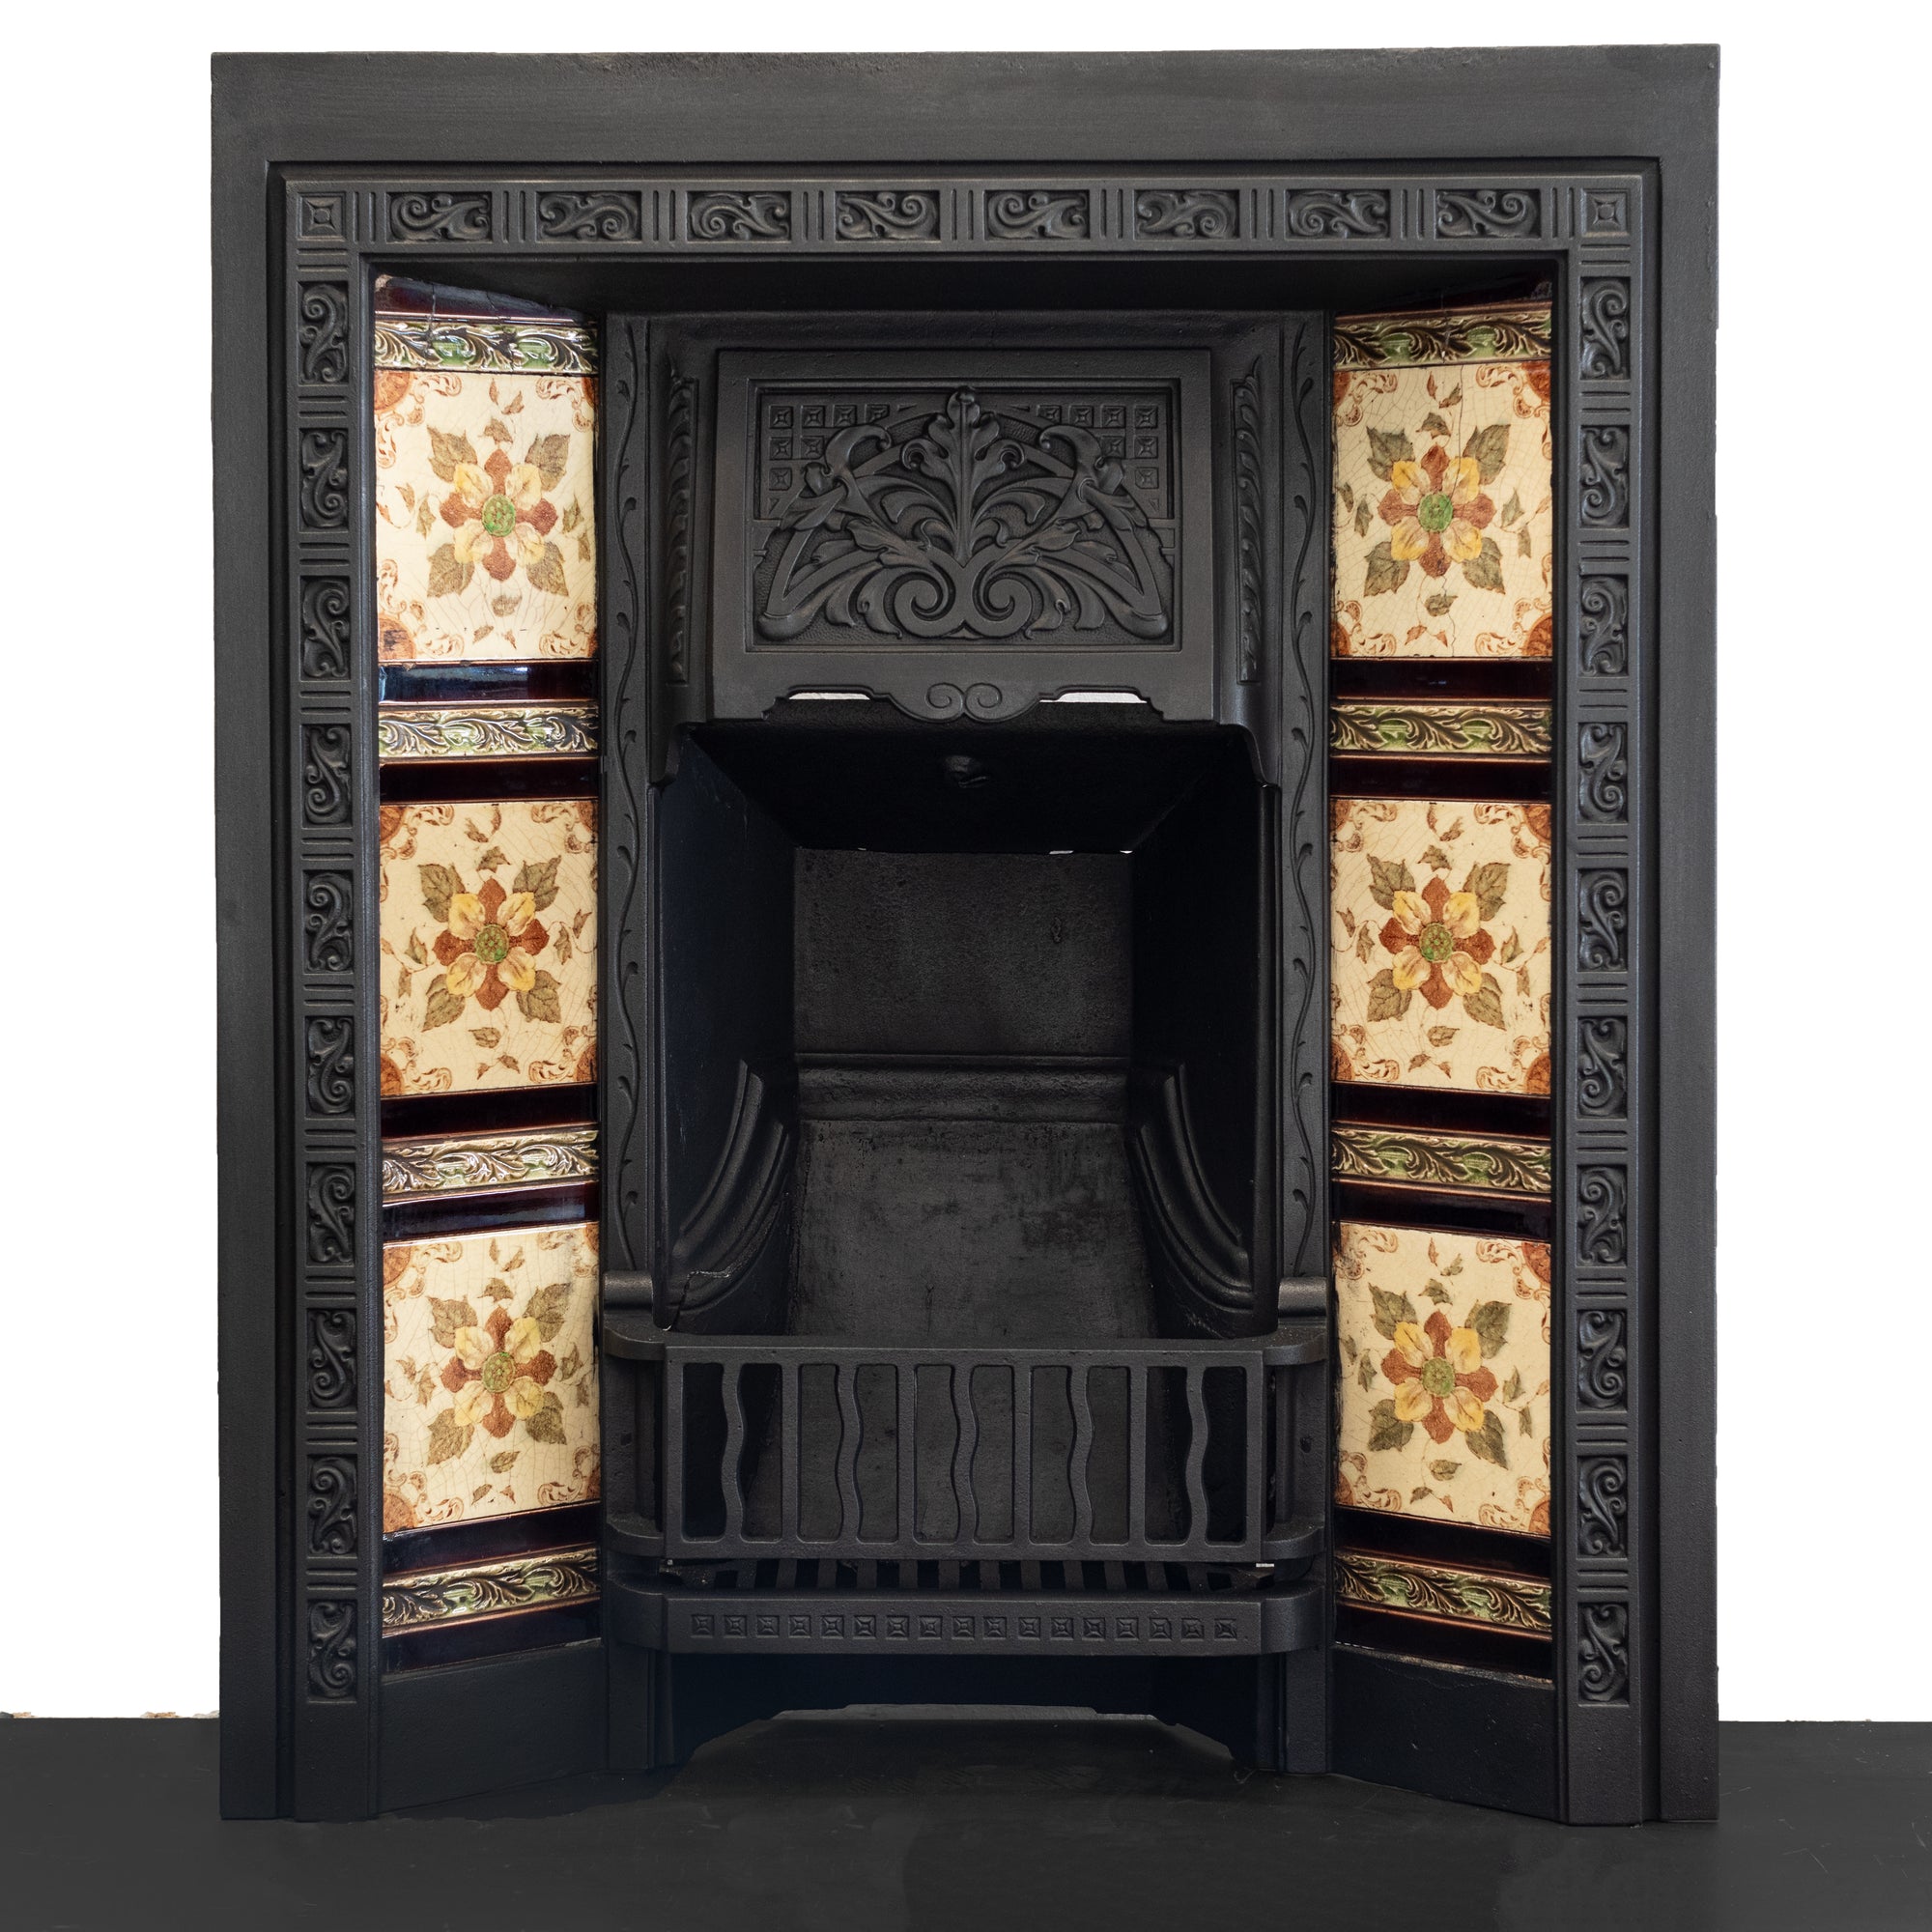 Antique Victorian Tiled Fireplace Insert | The Architectural Forum